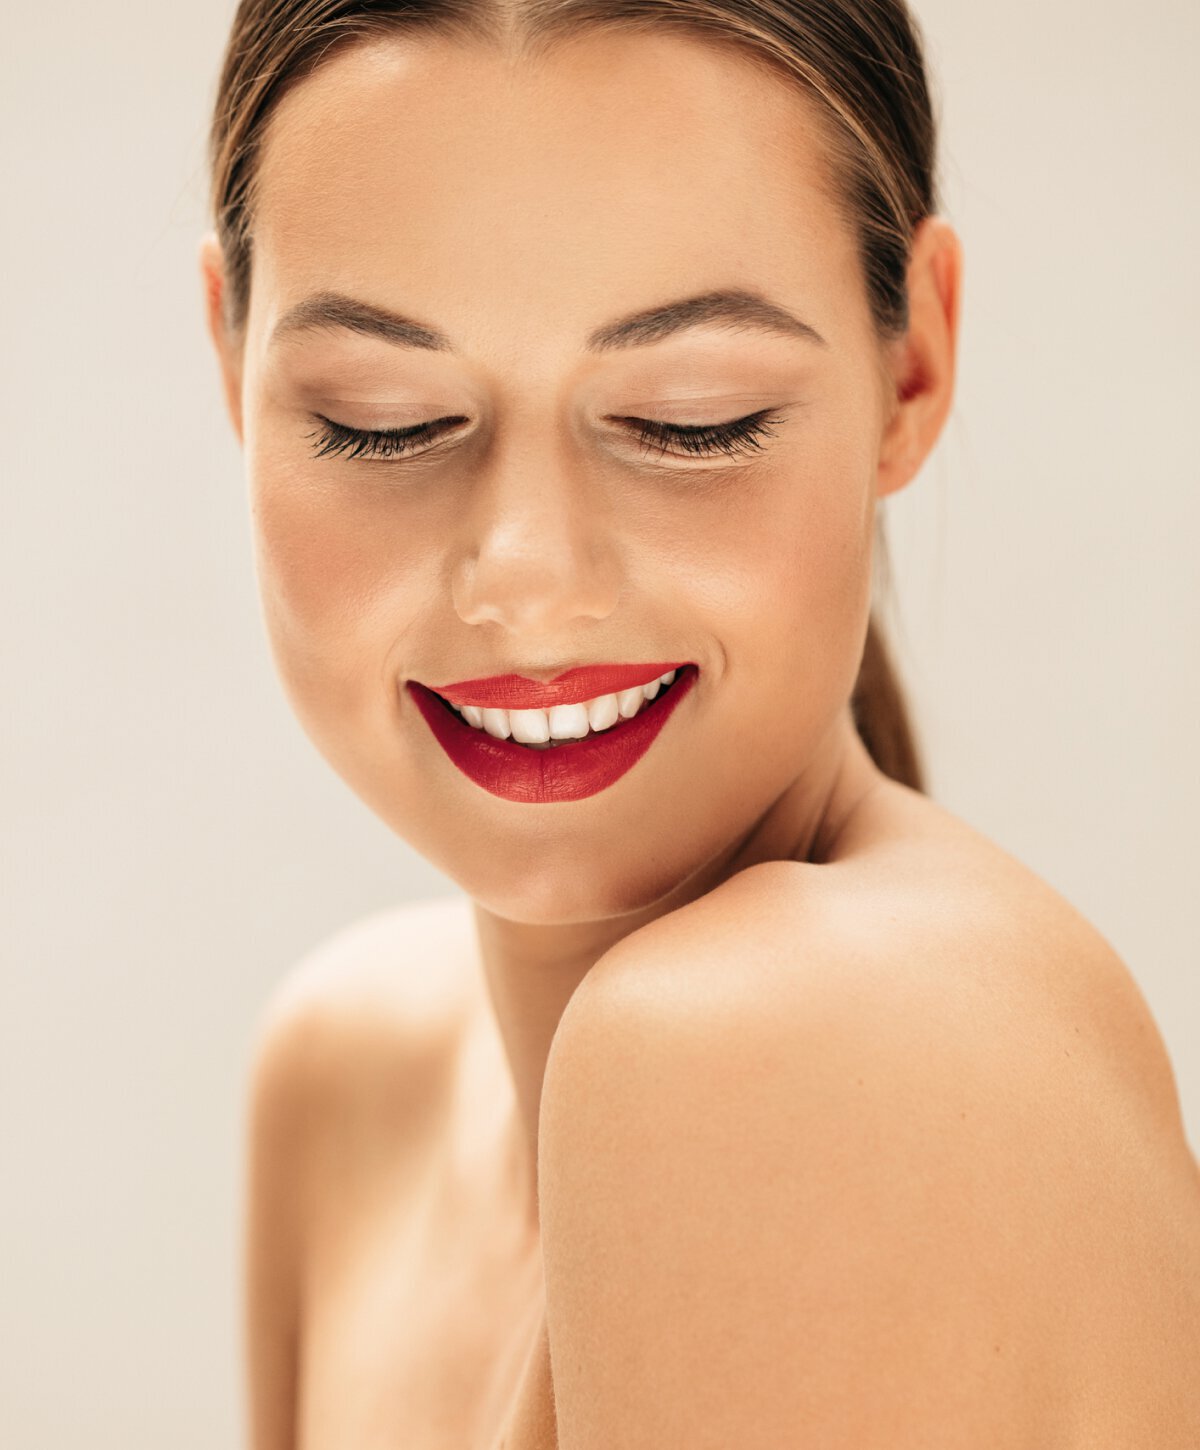 Manchester Lip Fillers model with looking down and smiling with red lipstick on